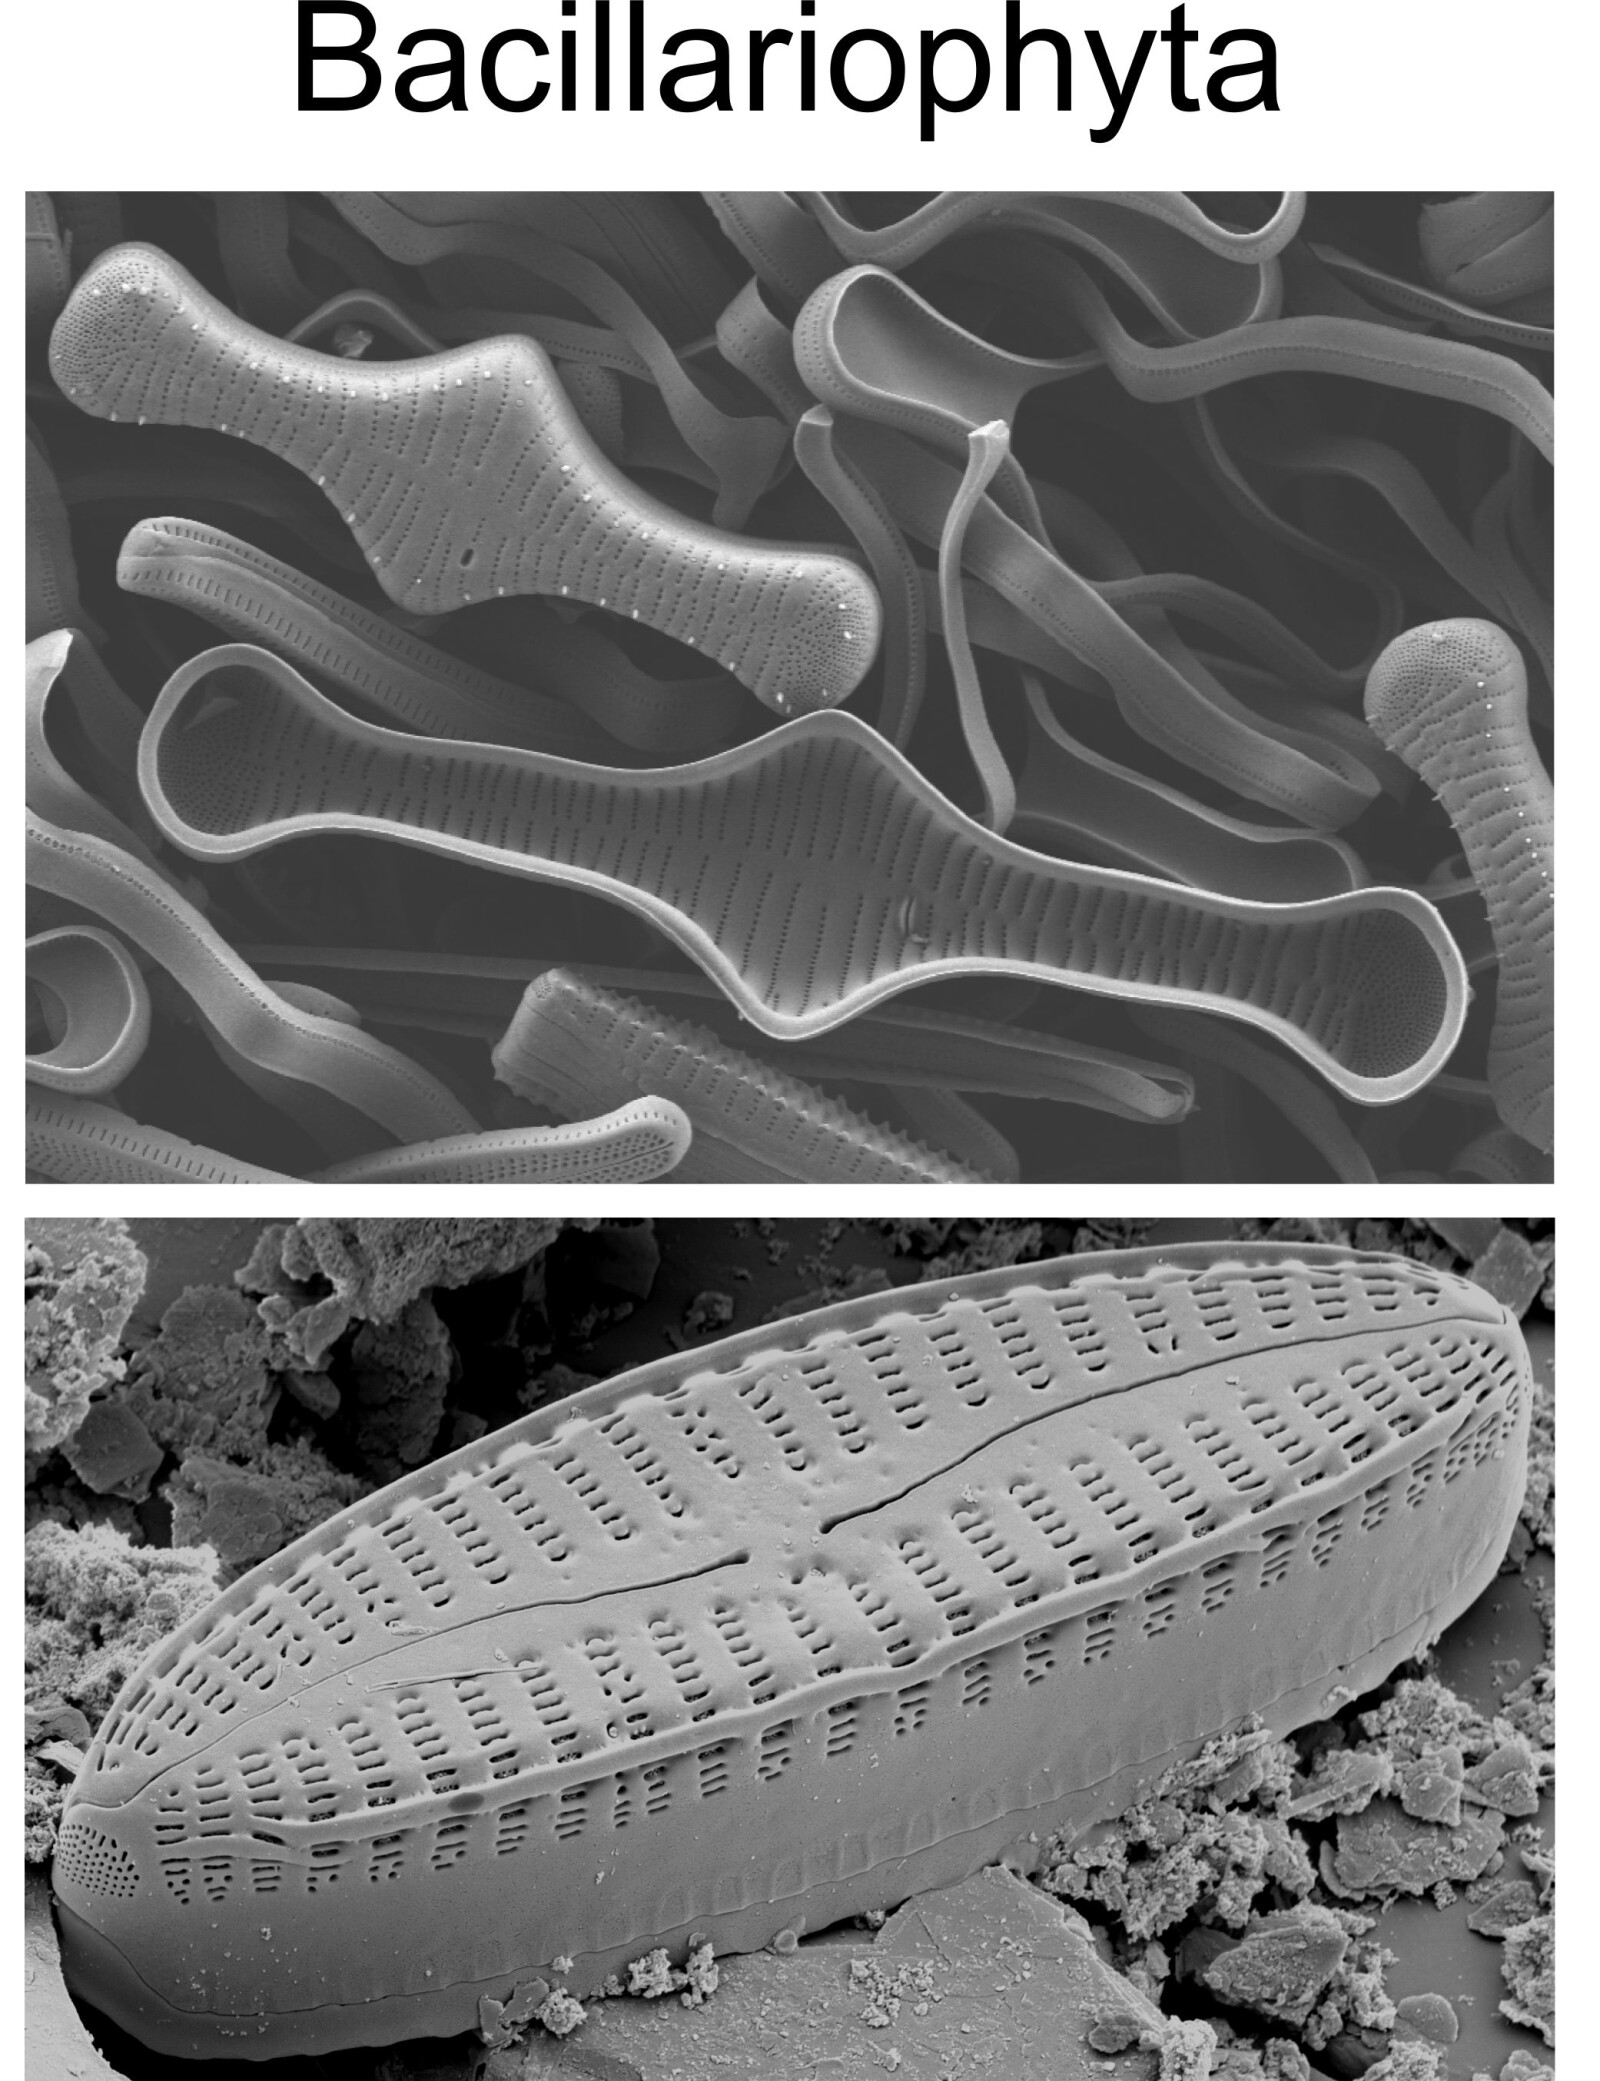 Scanning electron micrograph images of diatoms: Tabellaria (top) and Oricymba (bottom).